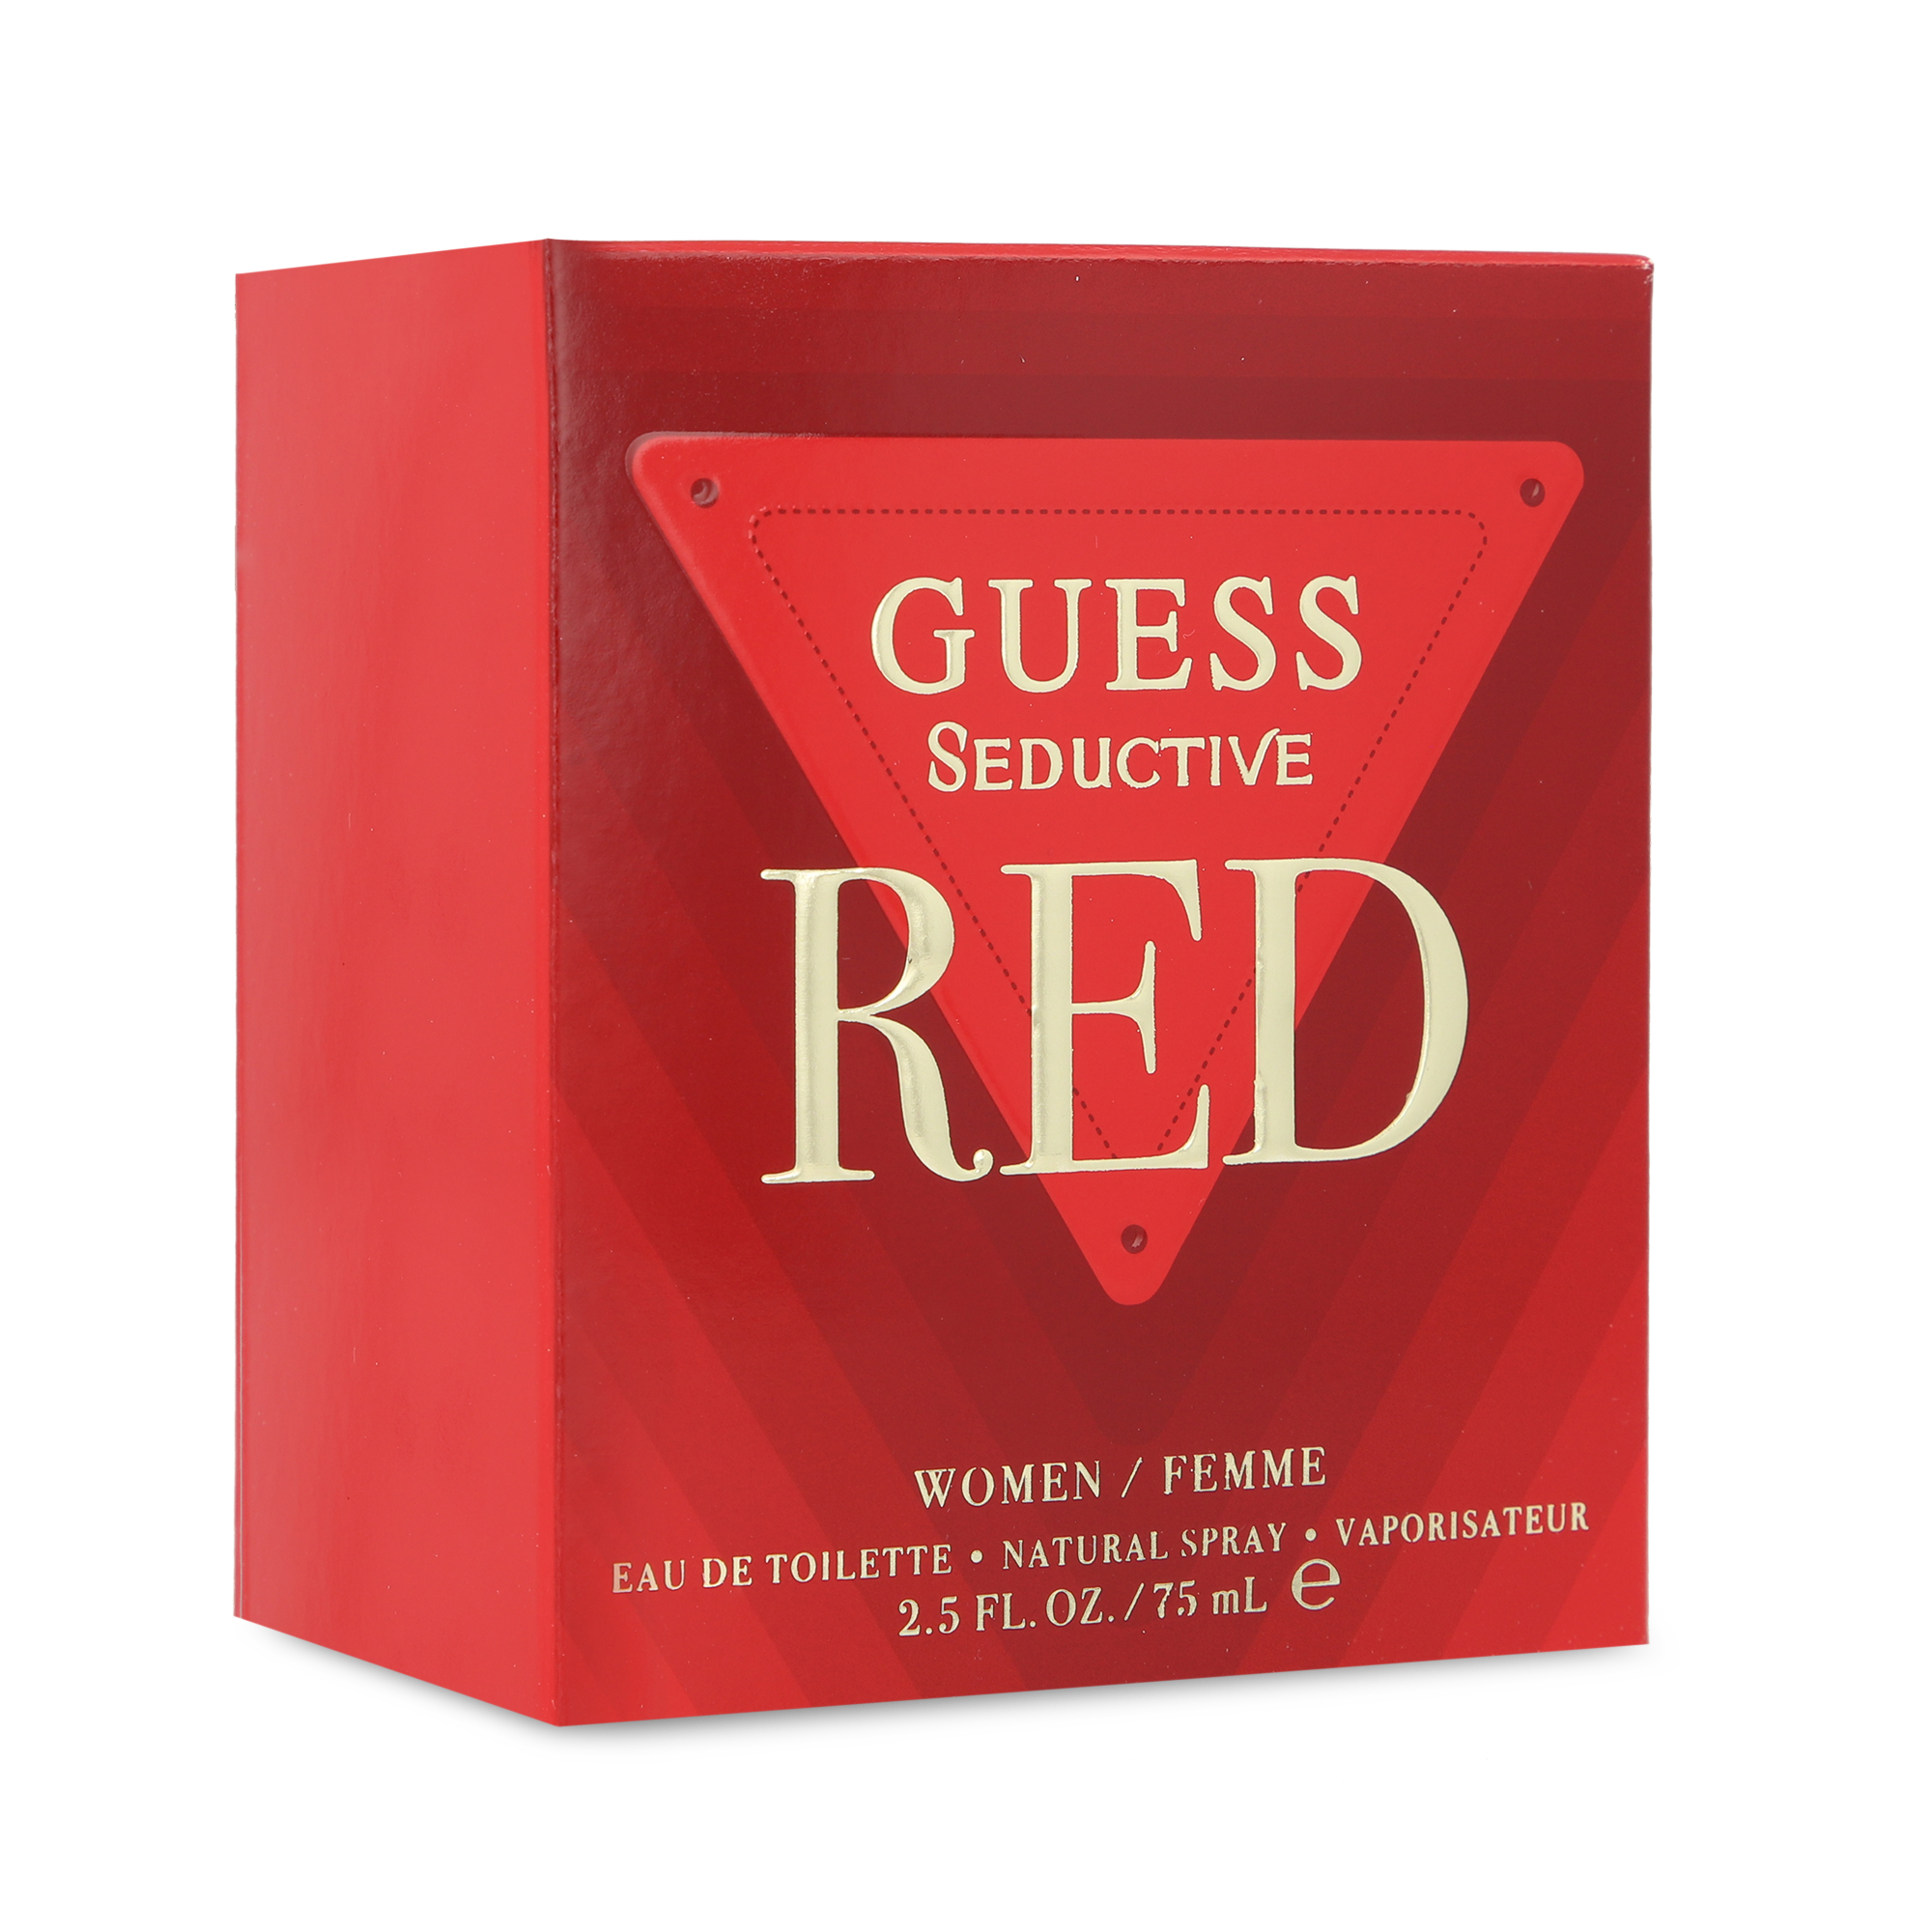 Perfume Dama Guess Seductive Red 75 ml Edt